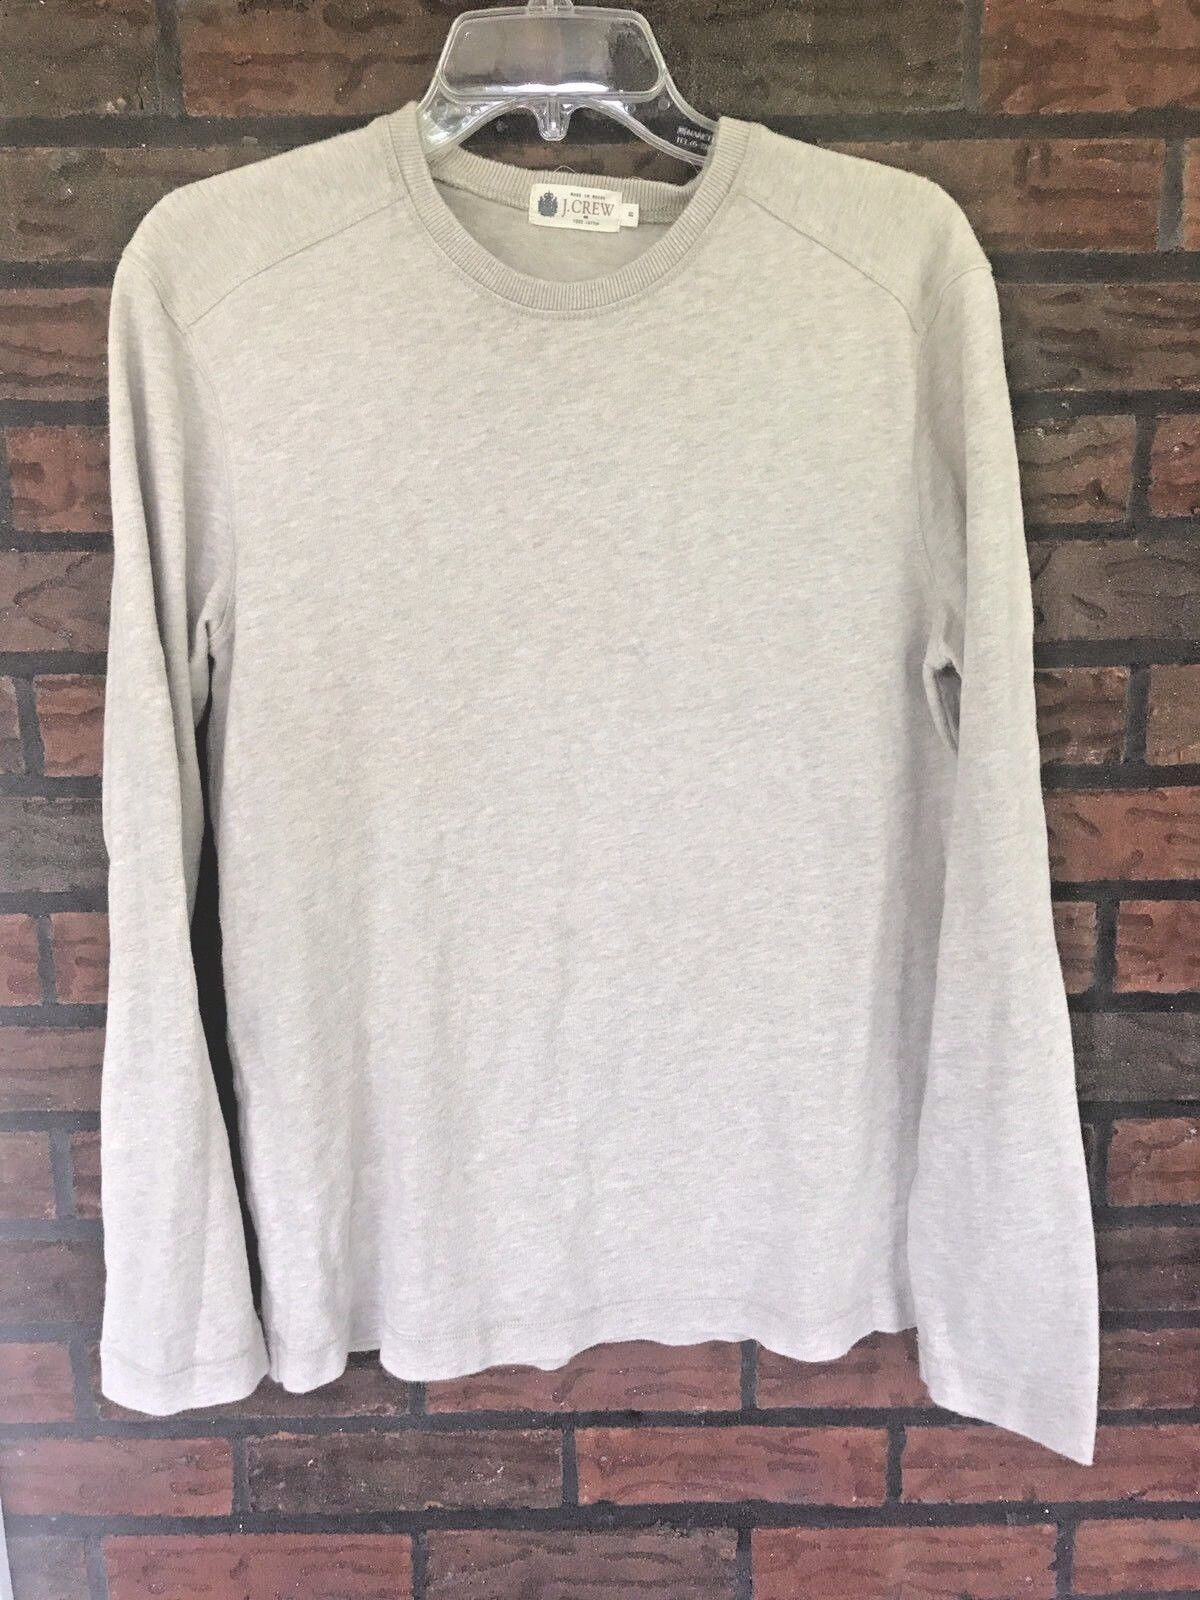 J Crew 100% Cotton Long Sleeve Beige Shirt Size Small Crew Neck Top Soft Layer - £2.23 GBP